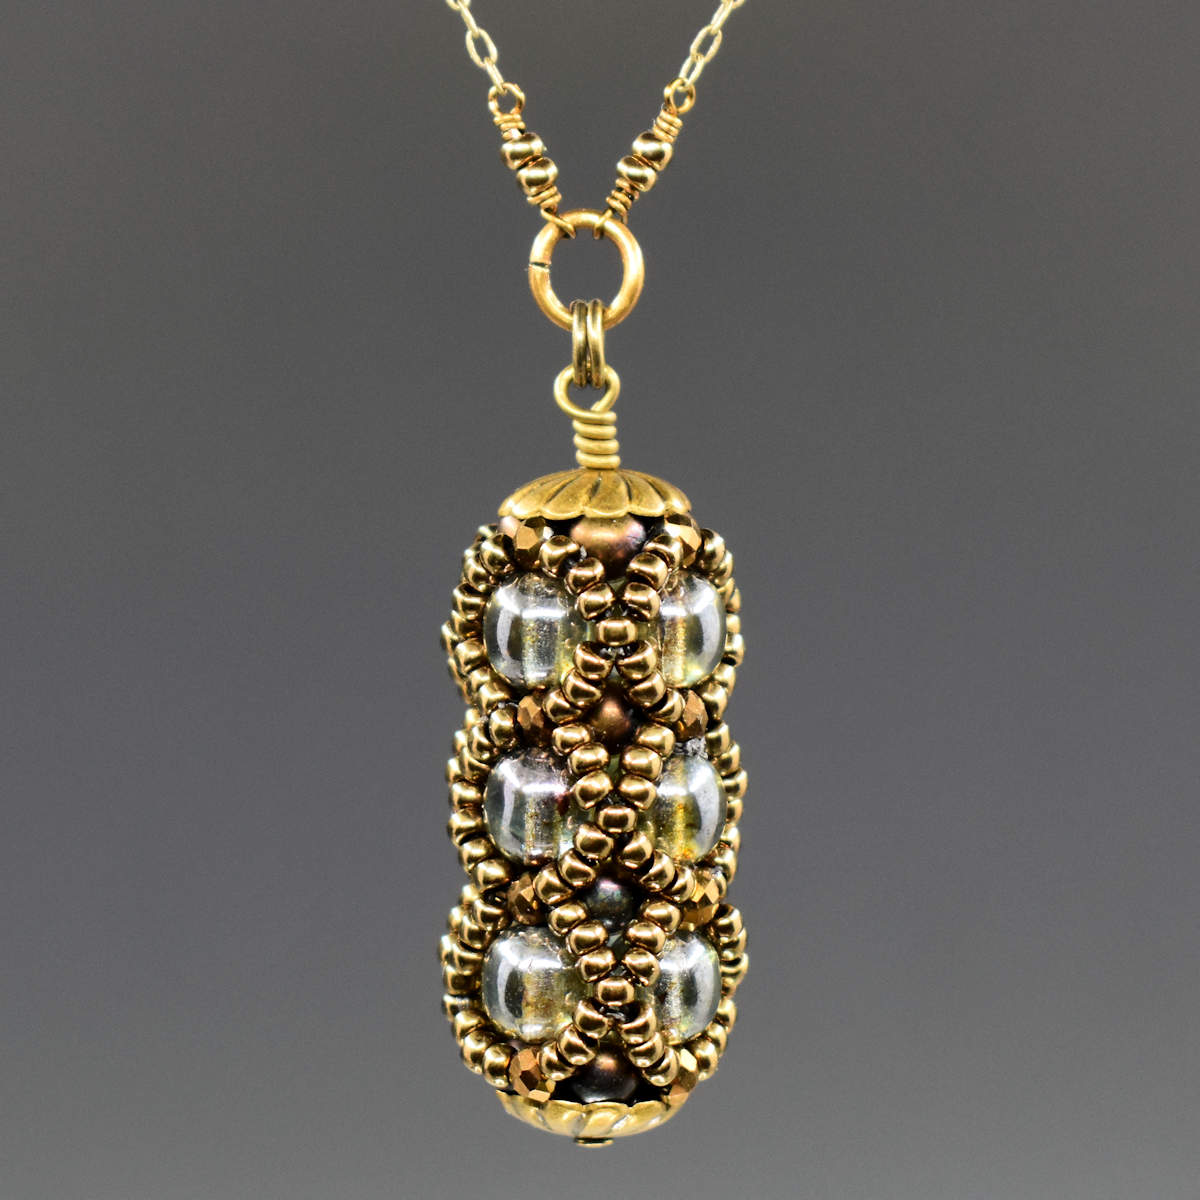 A small columnar pendant in gold and olive green hangs from a golden chain. The primary beads used are three stacked rows of lustered olive green rounds, surrounded by a netting of gold seed beads. 